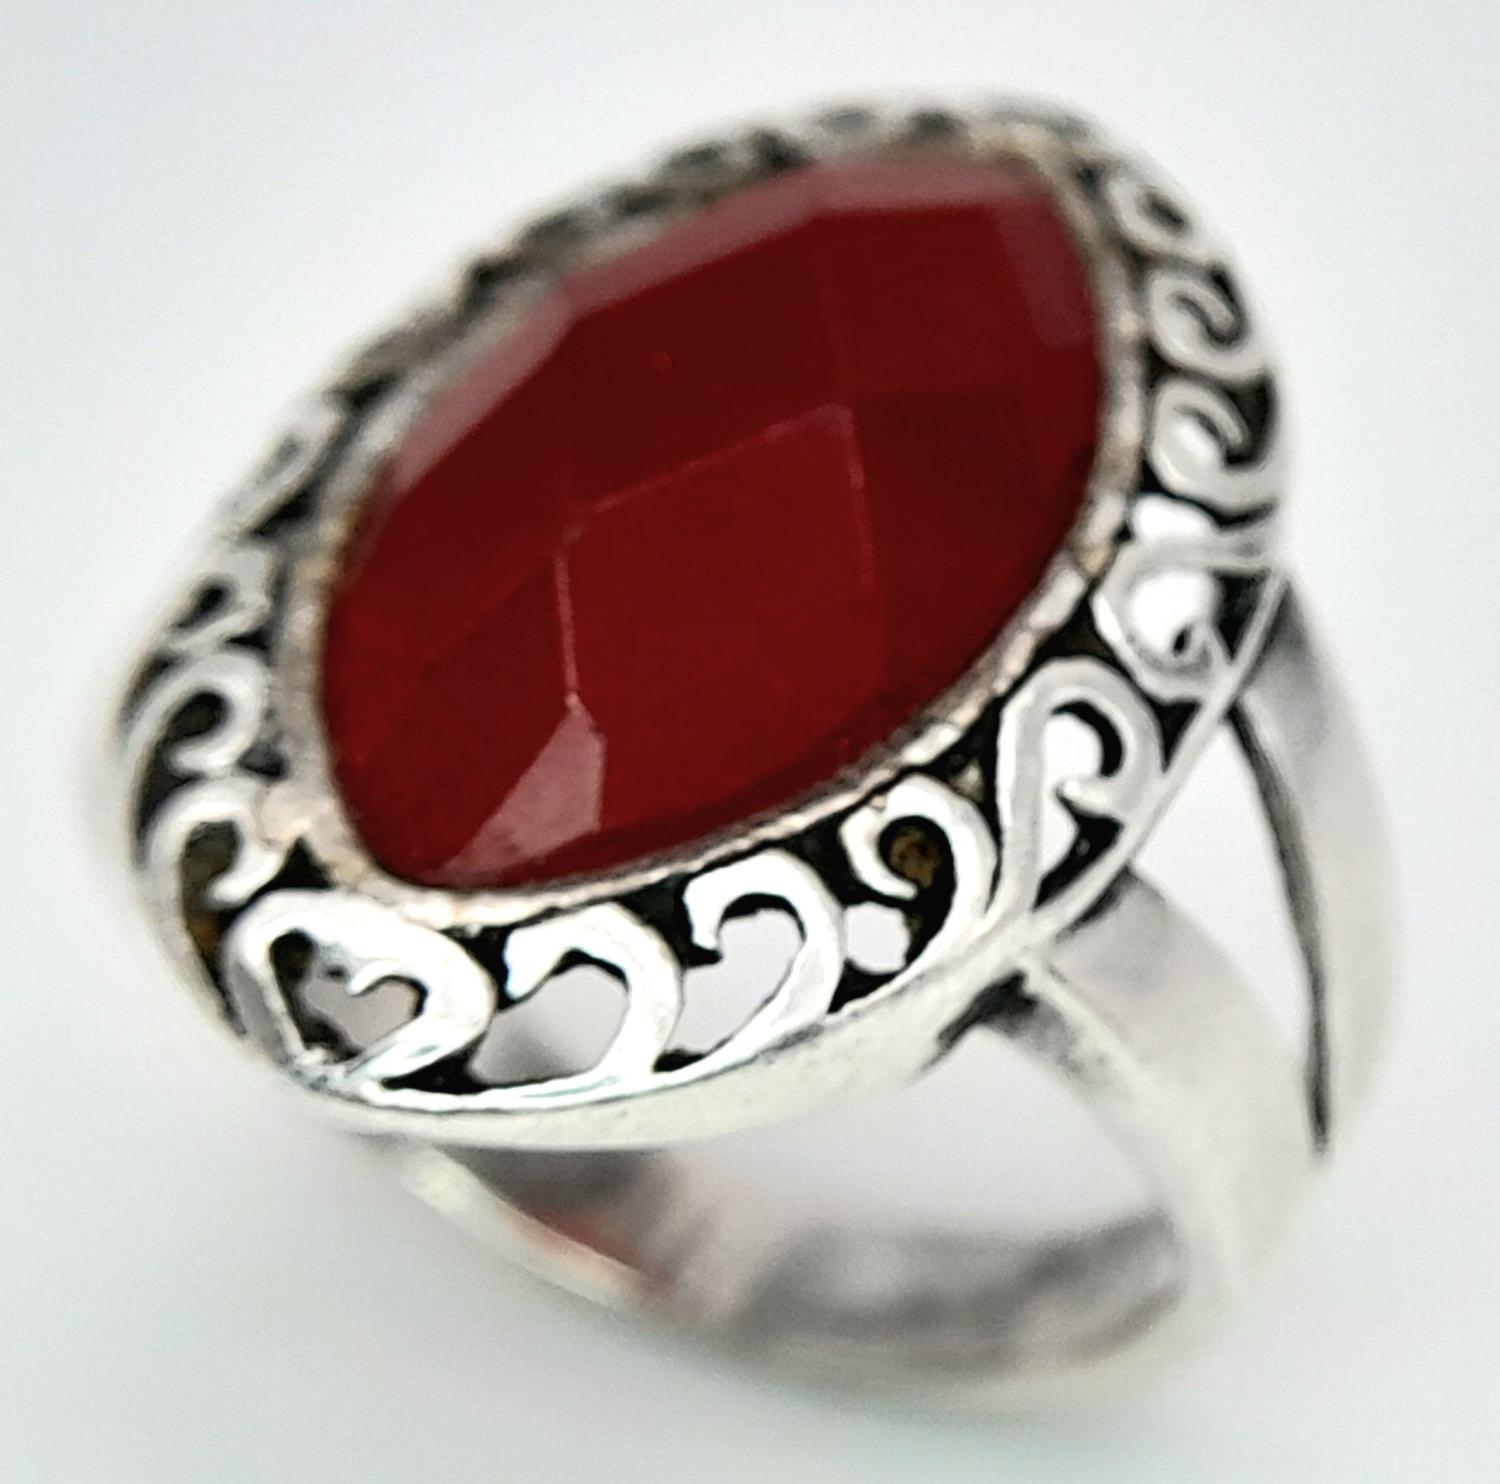 A Red Stone on 925 Silver Ring. Size P, 5.85g total weight. - Image 3 of 6